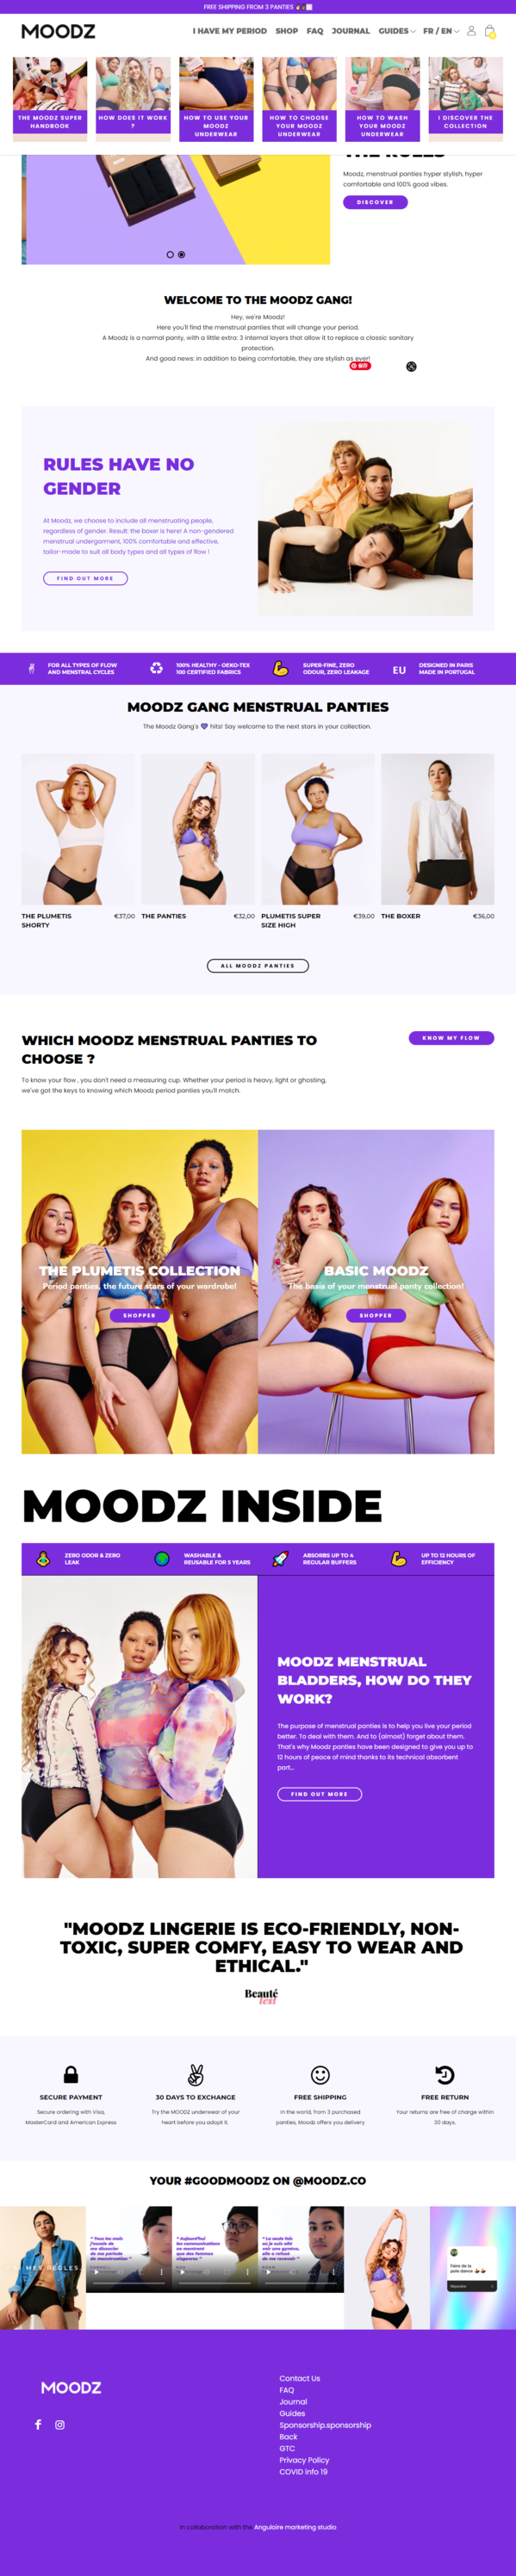 MOODZ, periods with style - moodz.co - moodz.co.png